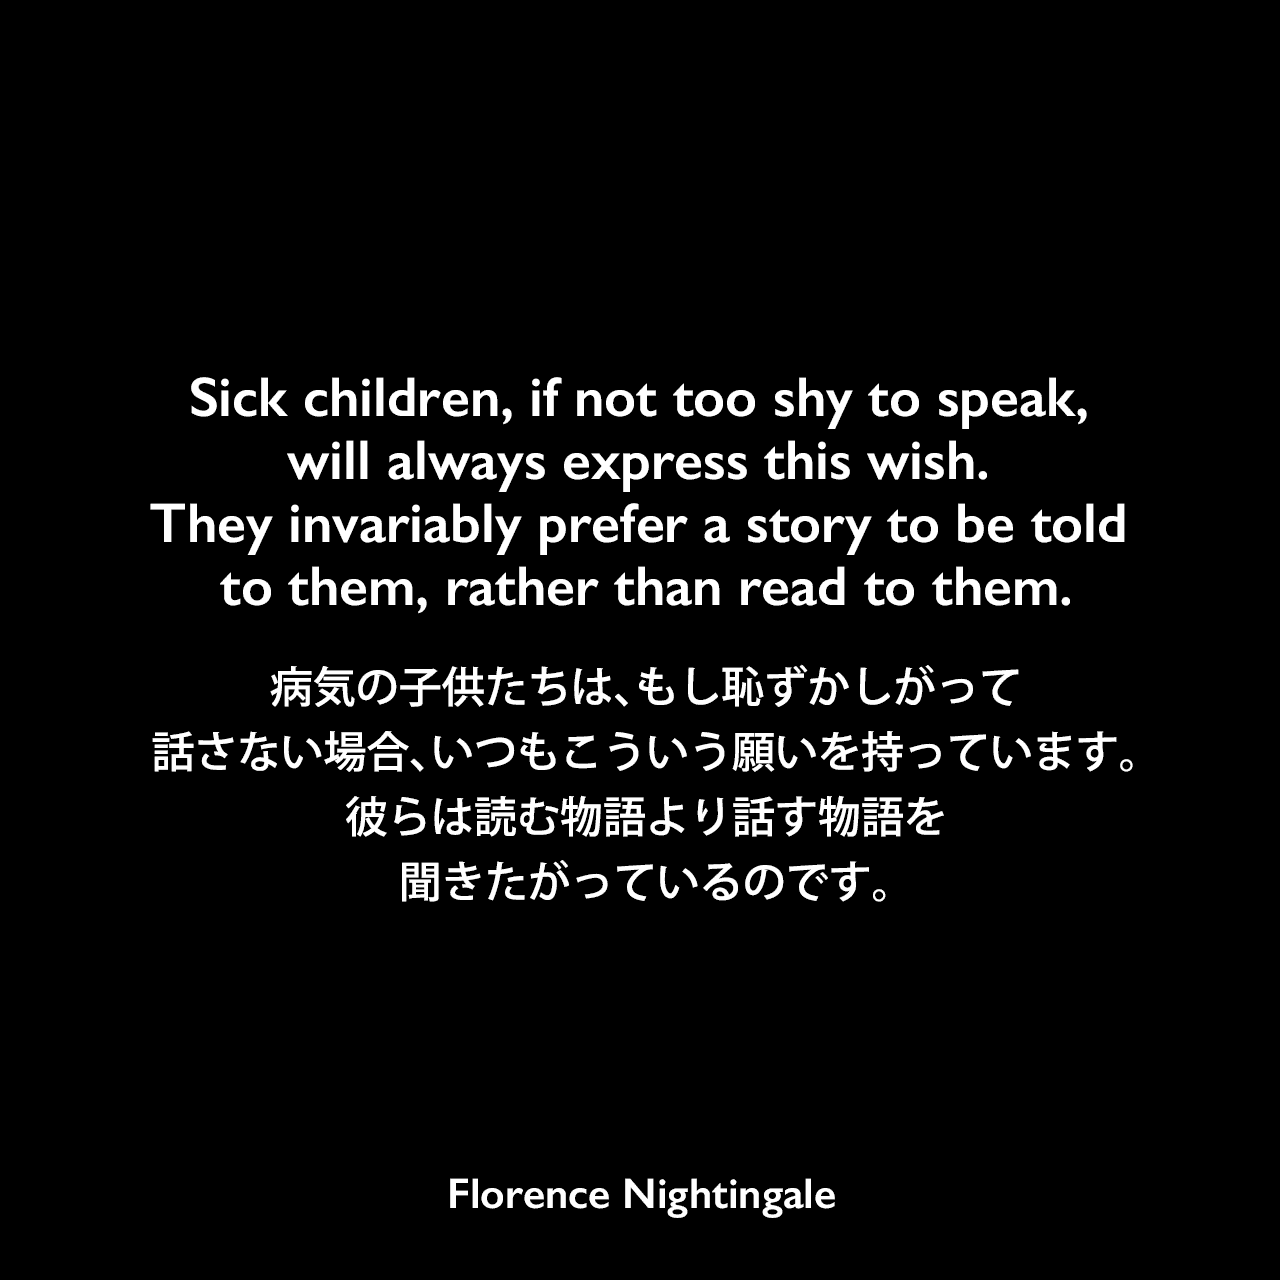 Sick children, if not too shy to speak, will always express this wish. They invariably prefer a story to be told to them, rather than read to them.病気の子供たちは、もし恥ずかしがって話さない場合、いつもこういう願いを持っています。彼らは読む物語より話す物語を聞きたがっているのです。Florence Nightingale